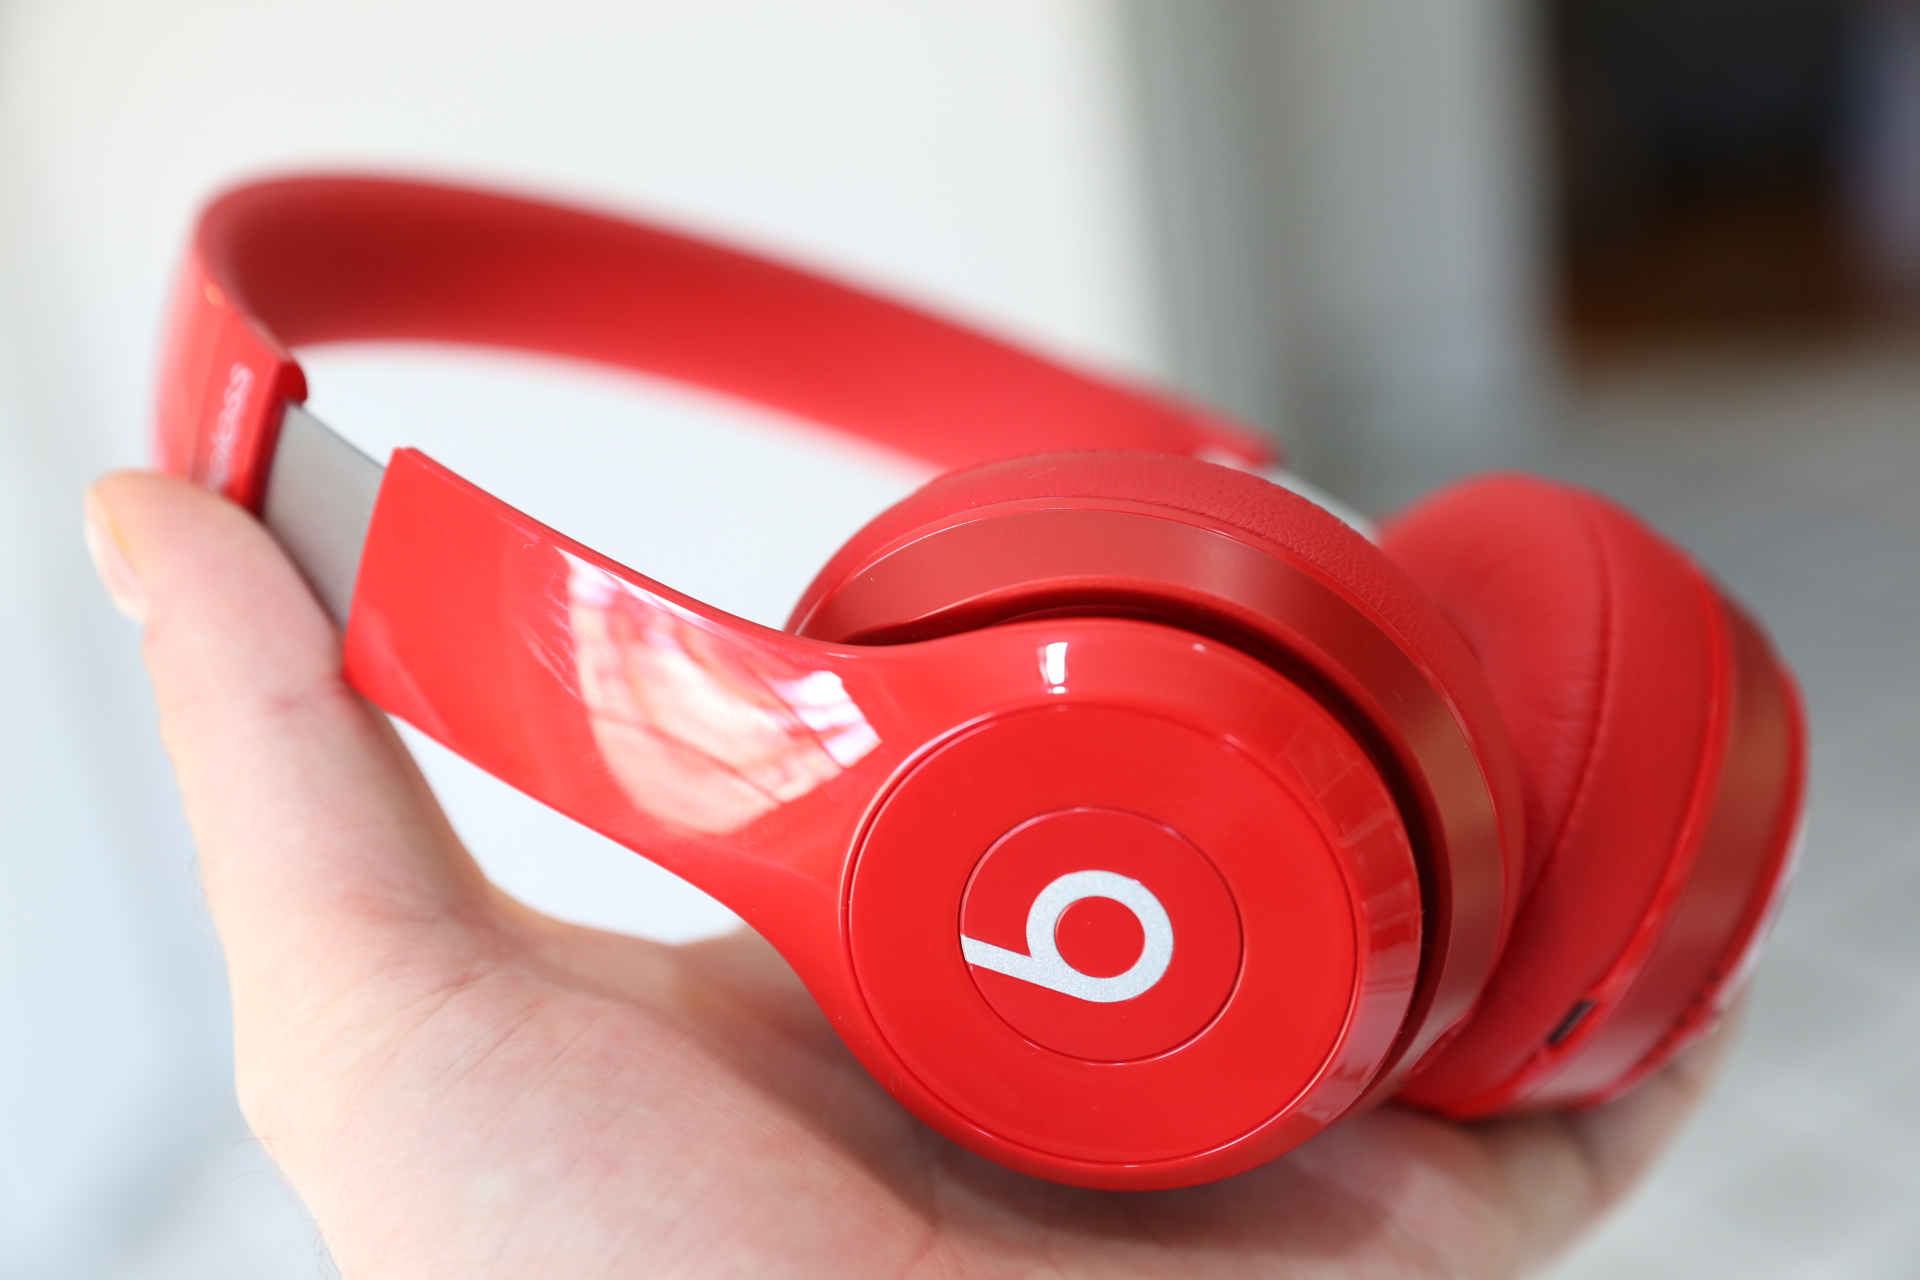 beats solo 2 wired red